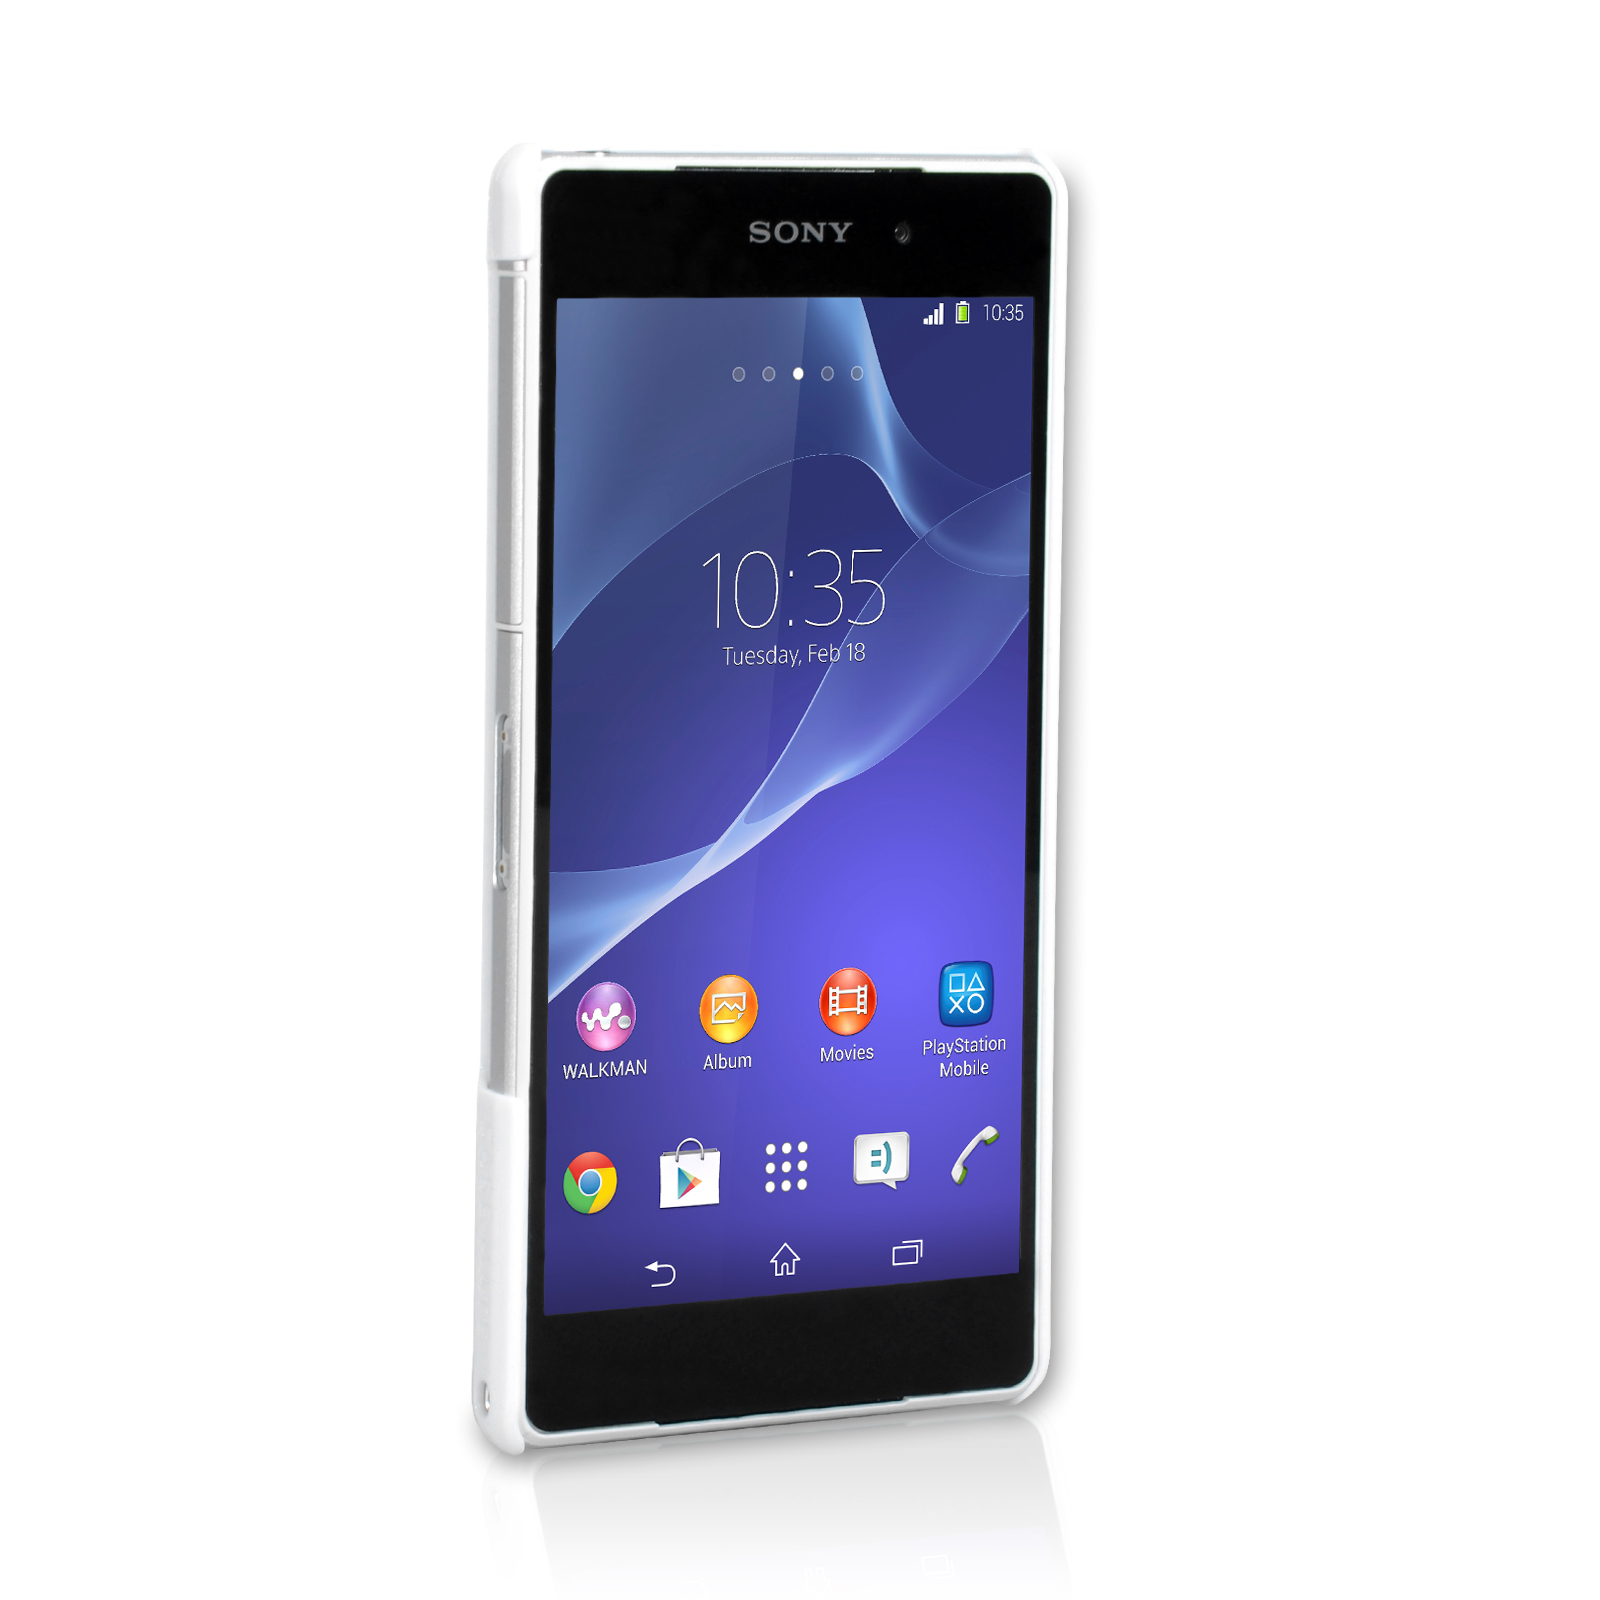 Case Mate Barely There for Sony Xperia Z2 - White